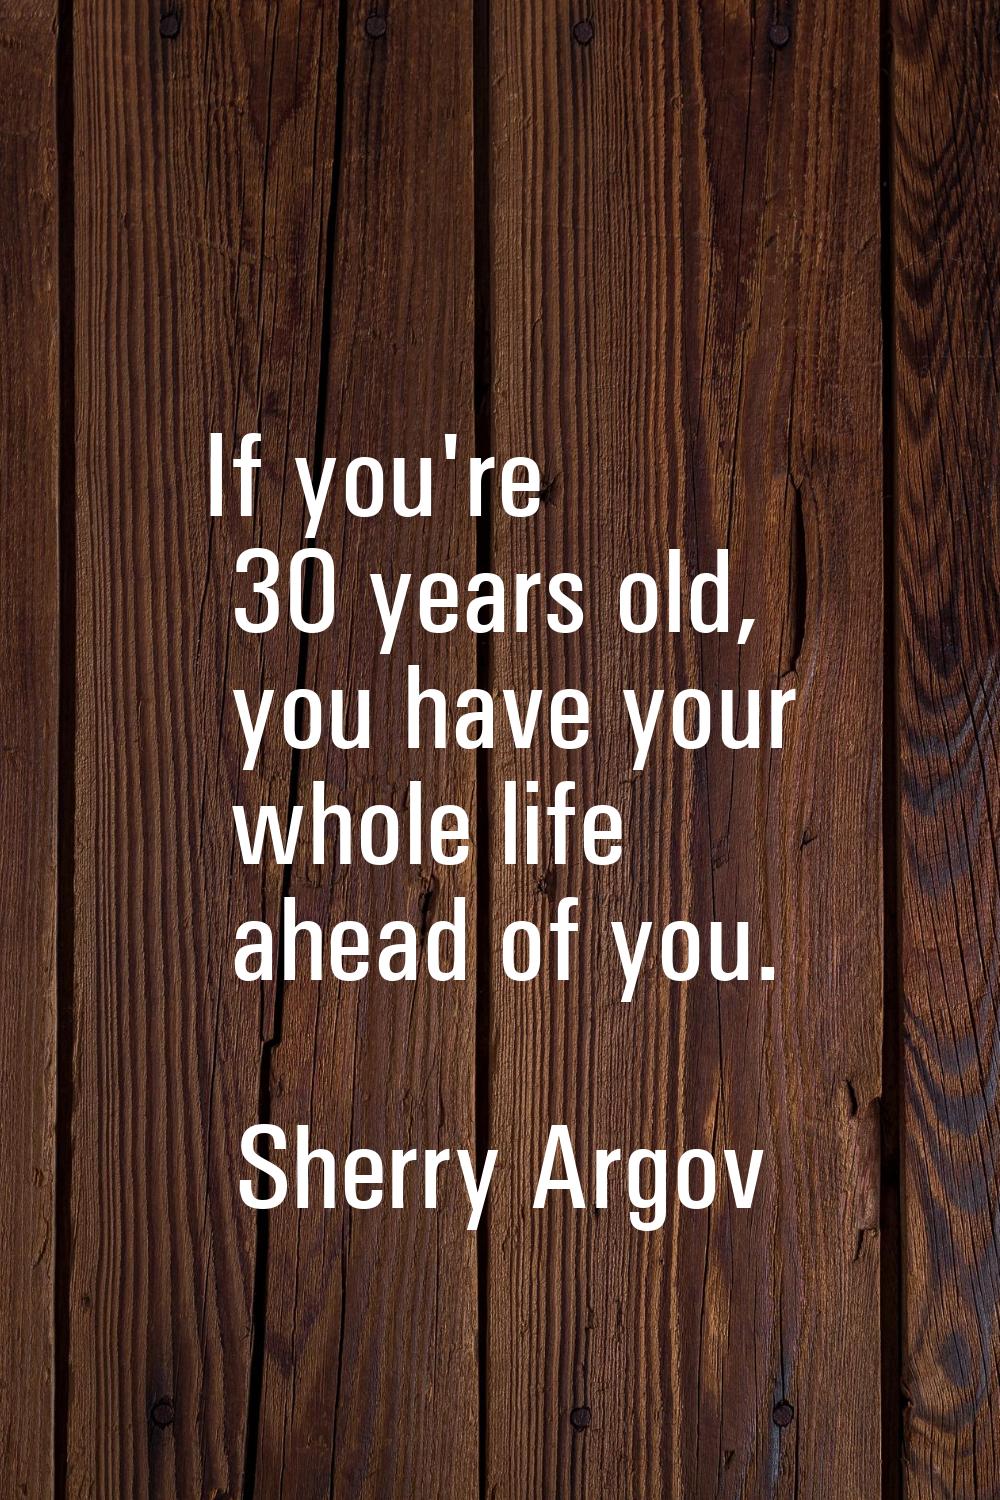 If you're 30 years old, you have your whole life ahead of you.